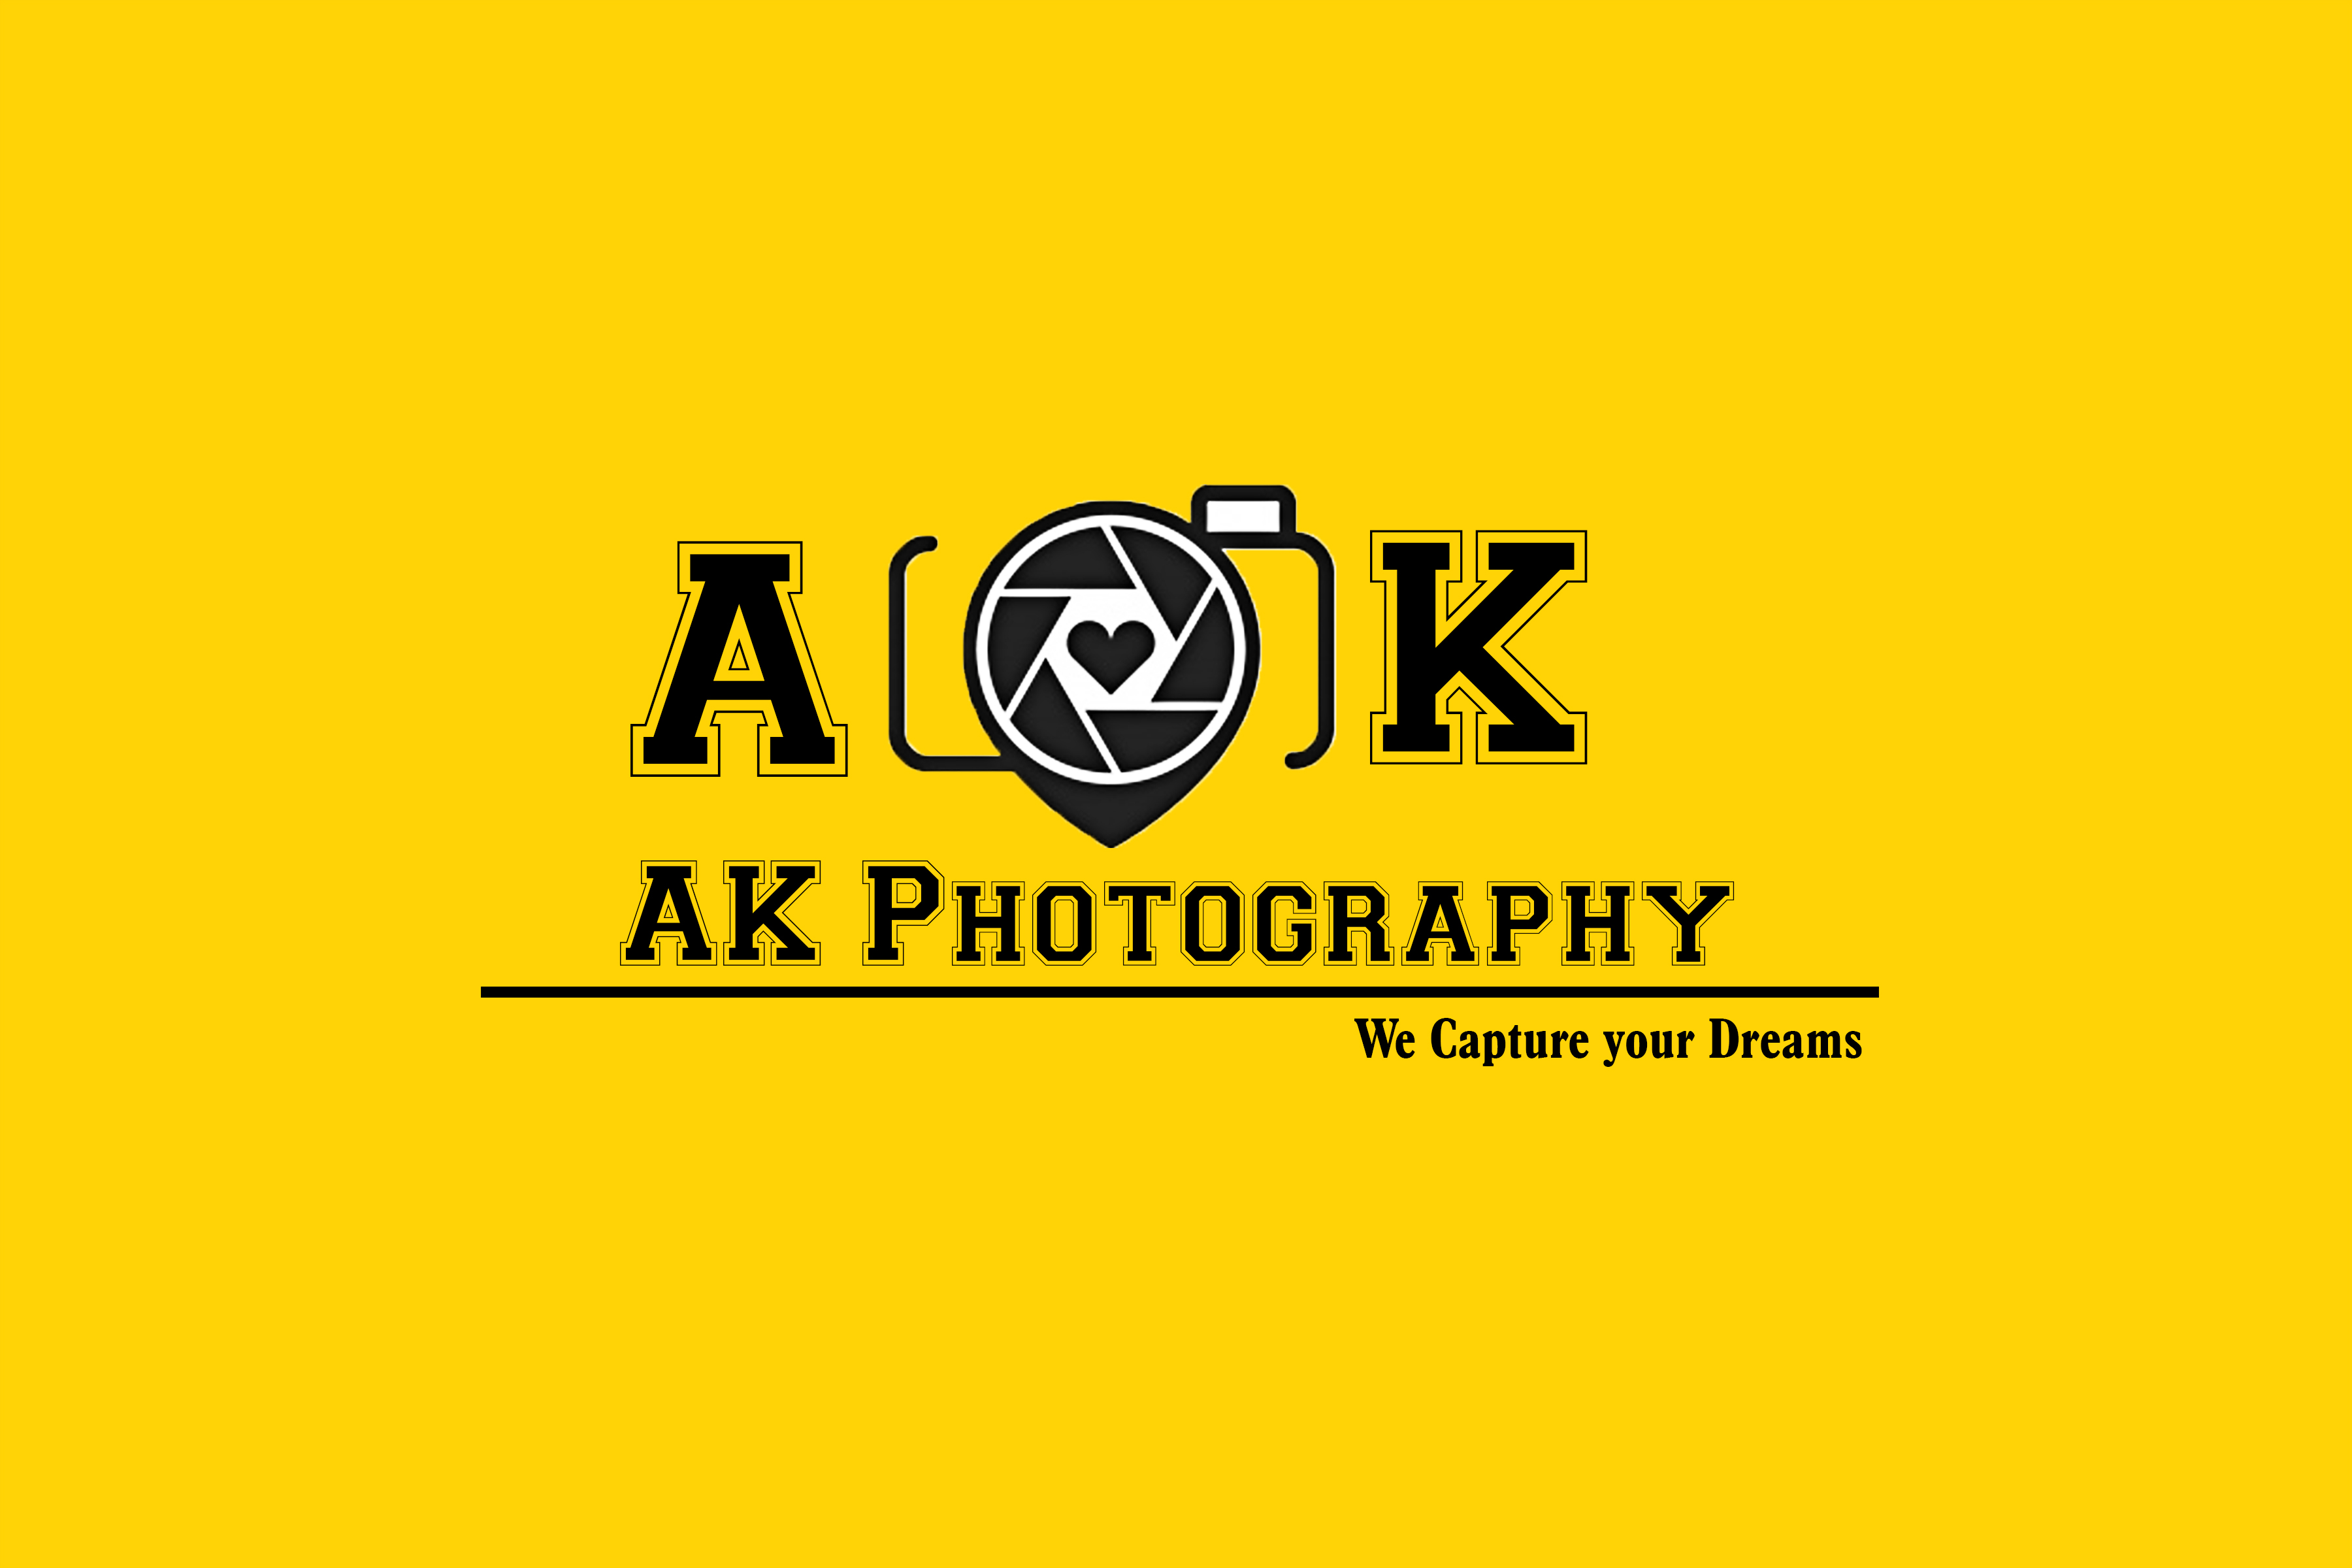 AK PHOTOGRAPHY|Catering Services|Event Services